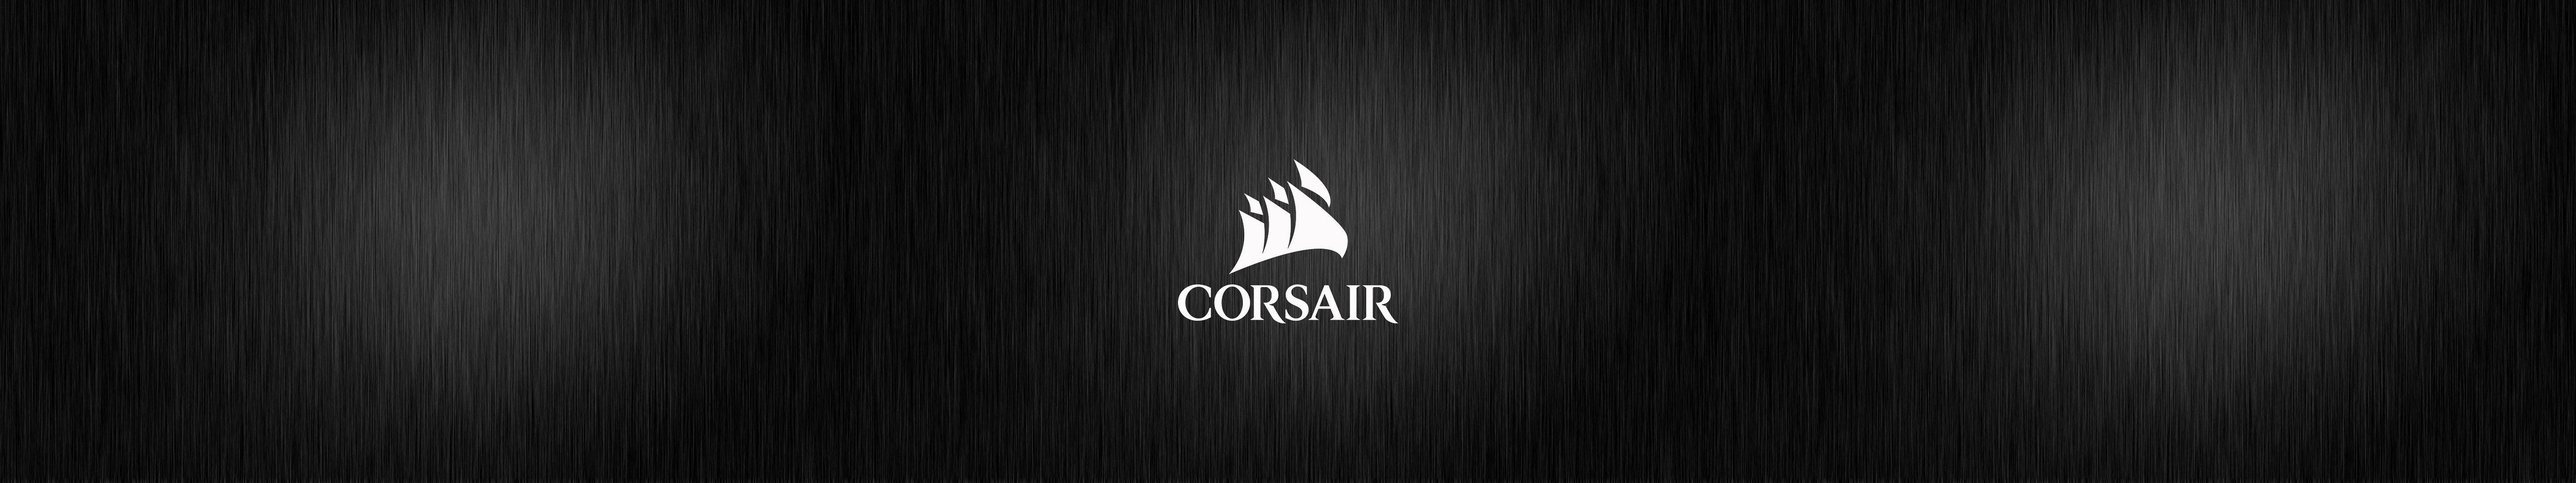 Upgrade your workstation with the latest Corsair black triple monitor Wallpaper